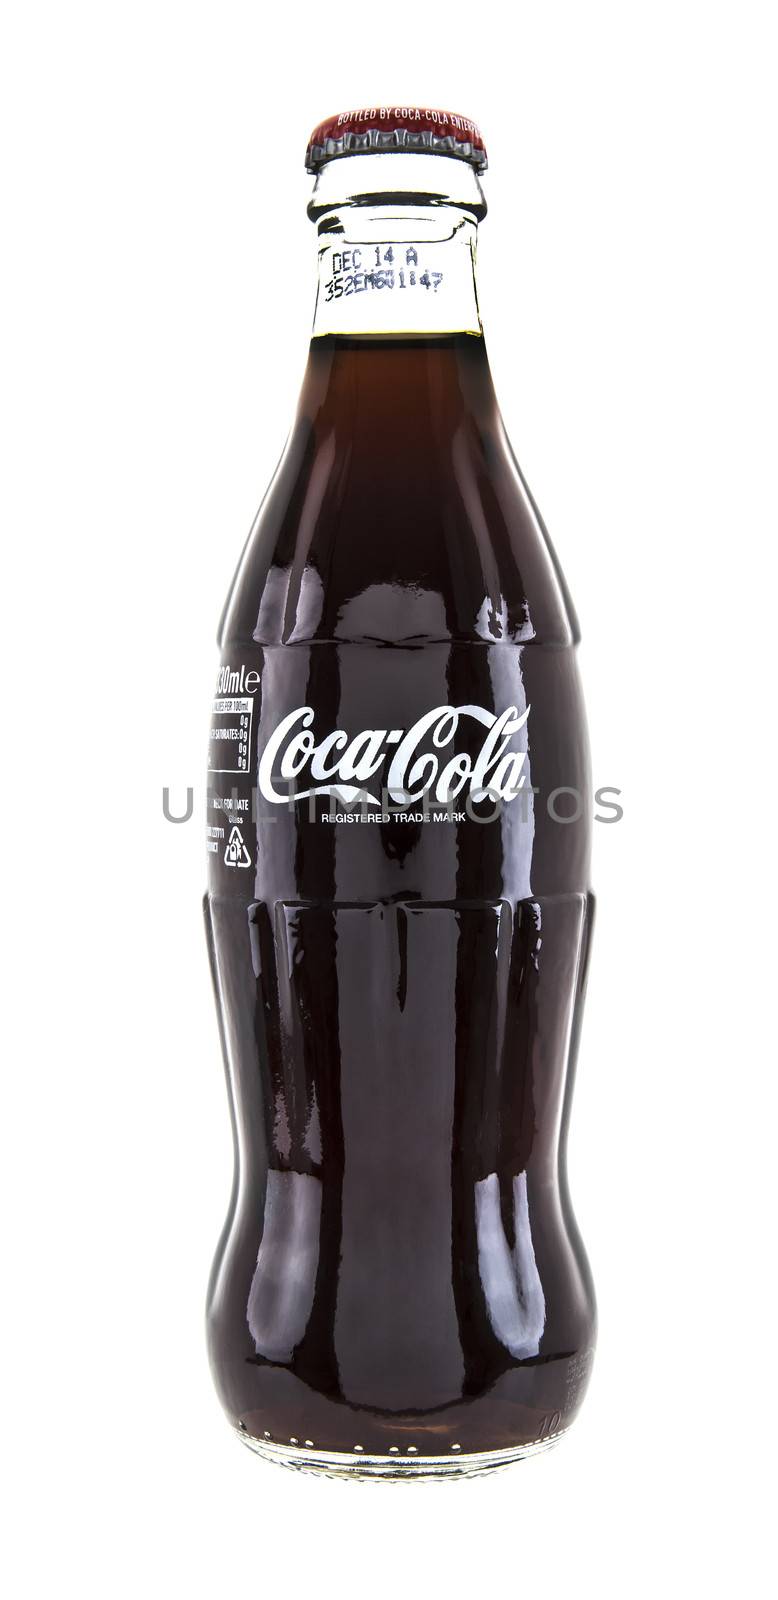 SWINDON, UK - JANUARY 1, 2014: Cassic Coca-Cola Bottle on White Background, The Coca-Cola Company  is an American multinational beverage corporation and manufacturer